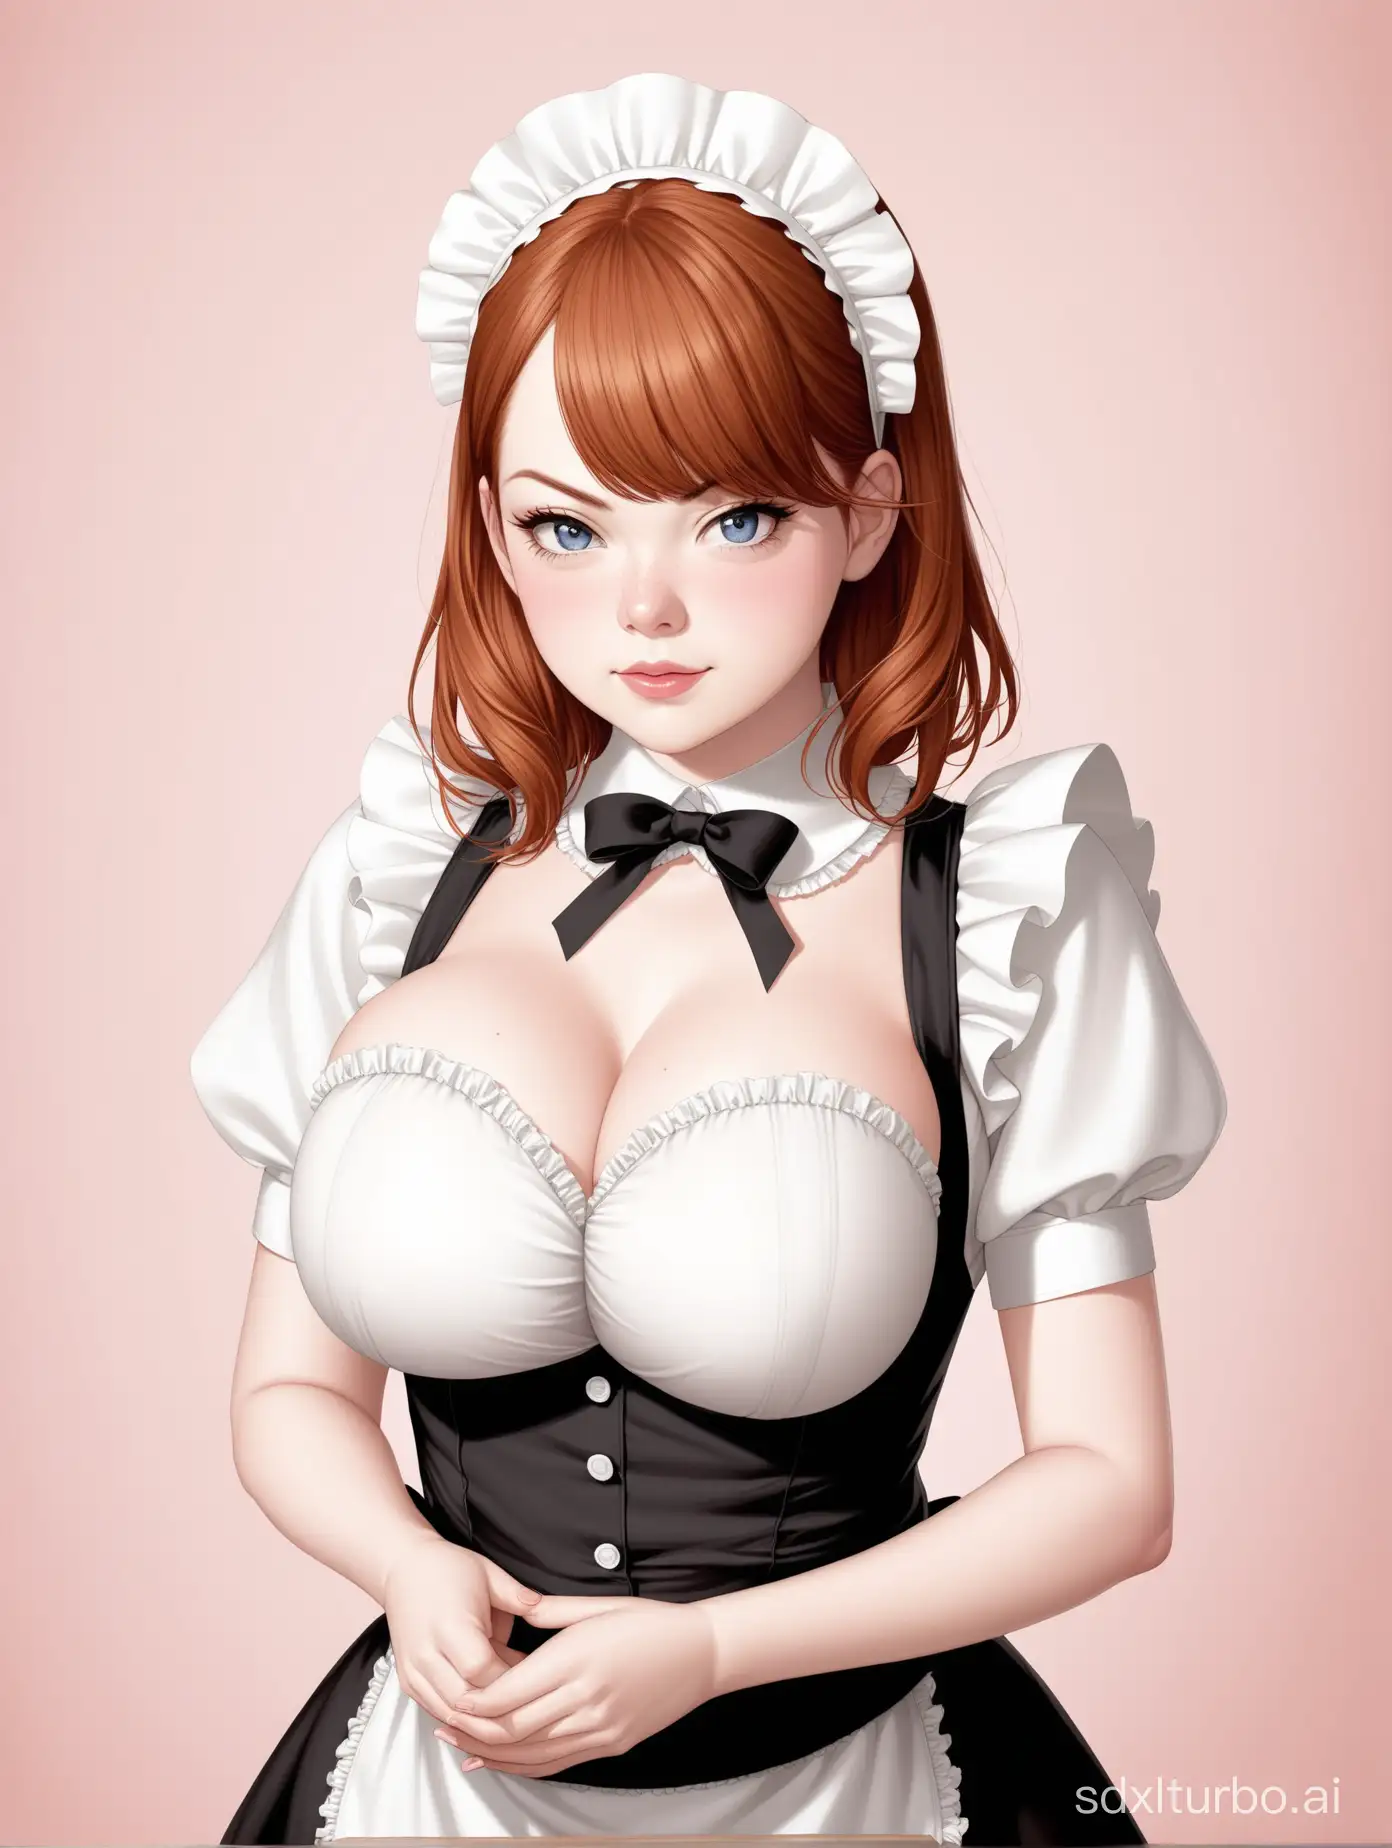 1 woman, like Emma Stone, huge breast，upper body, sexy, maid outfit Photograph by Loretta Lux